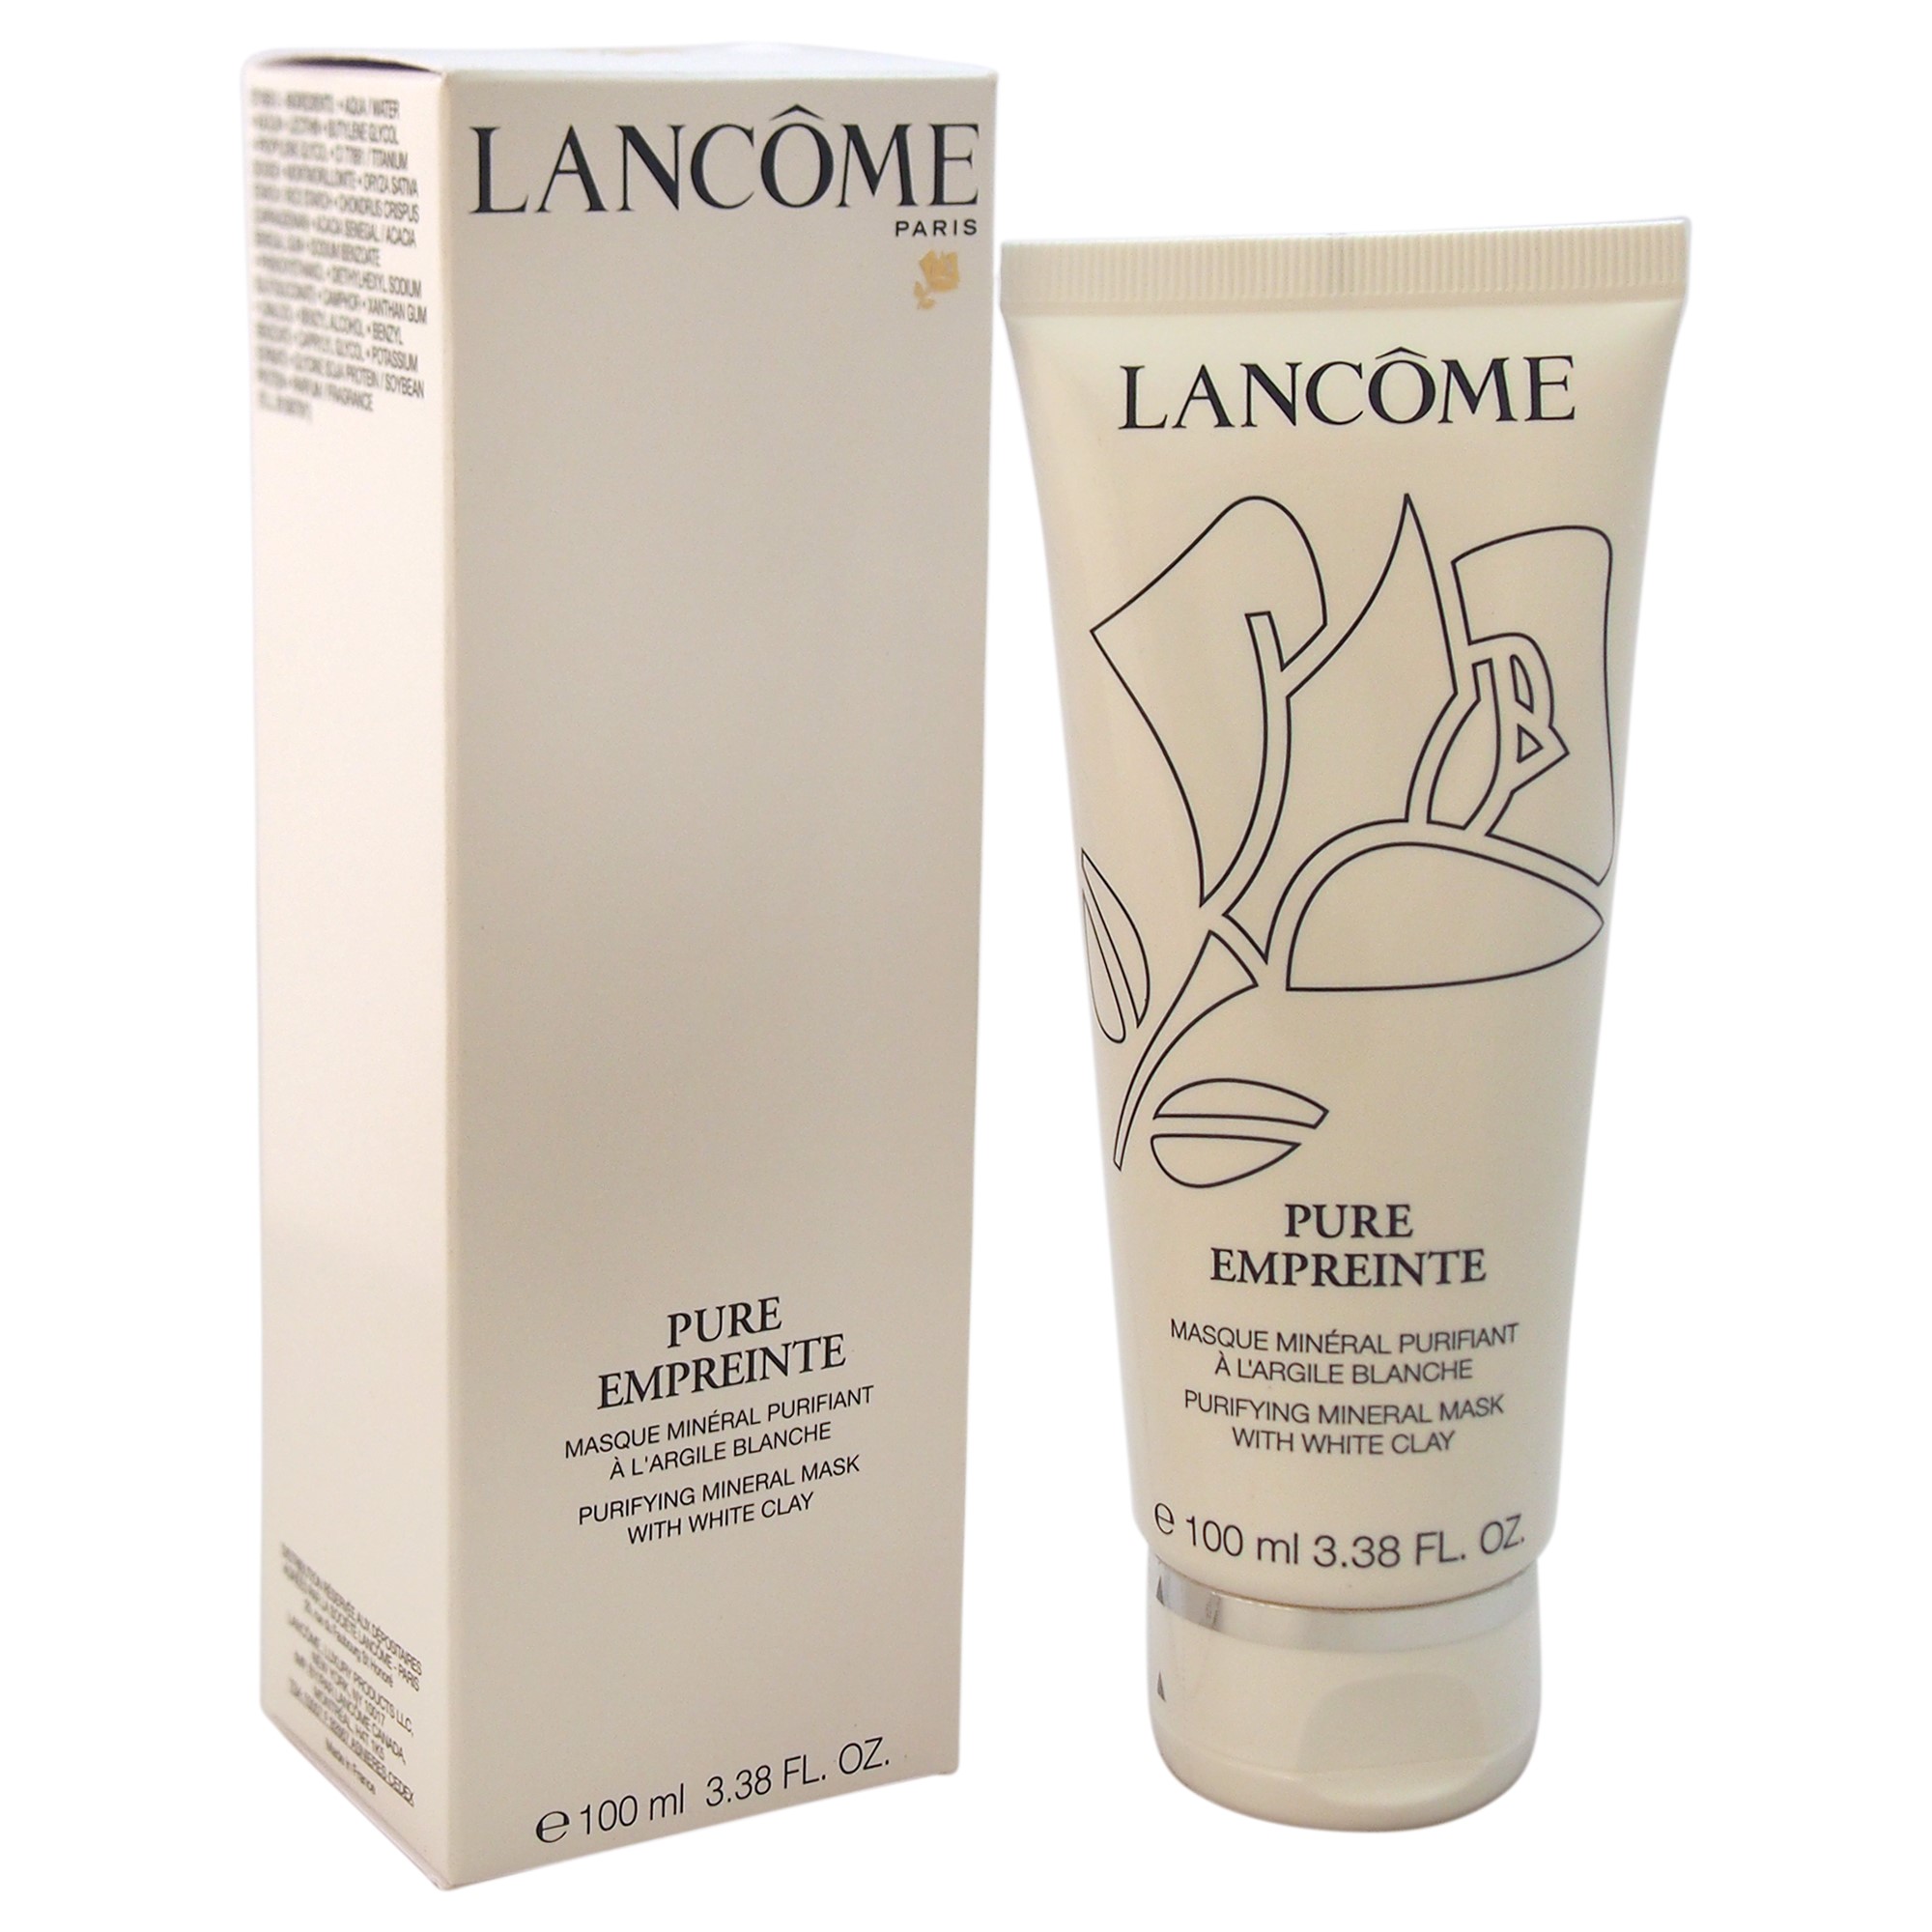 Lancome Pure Empreinte Purifying Mineral Face Mask, 3.3 Oz